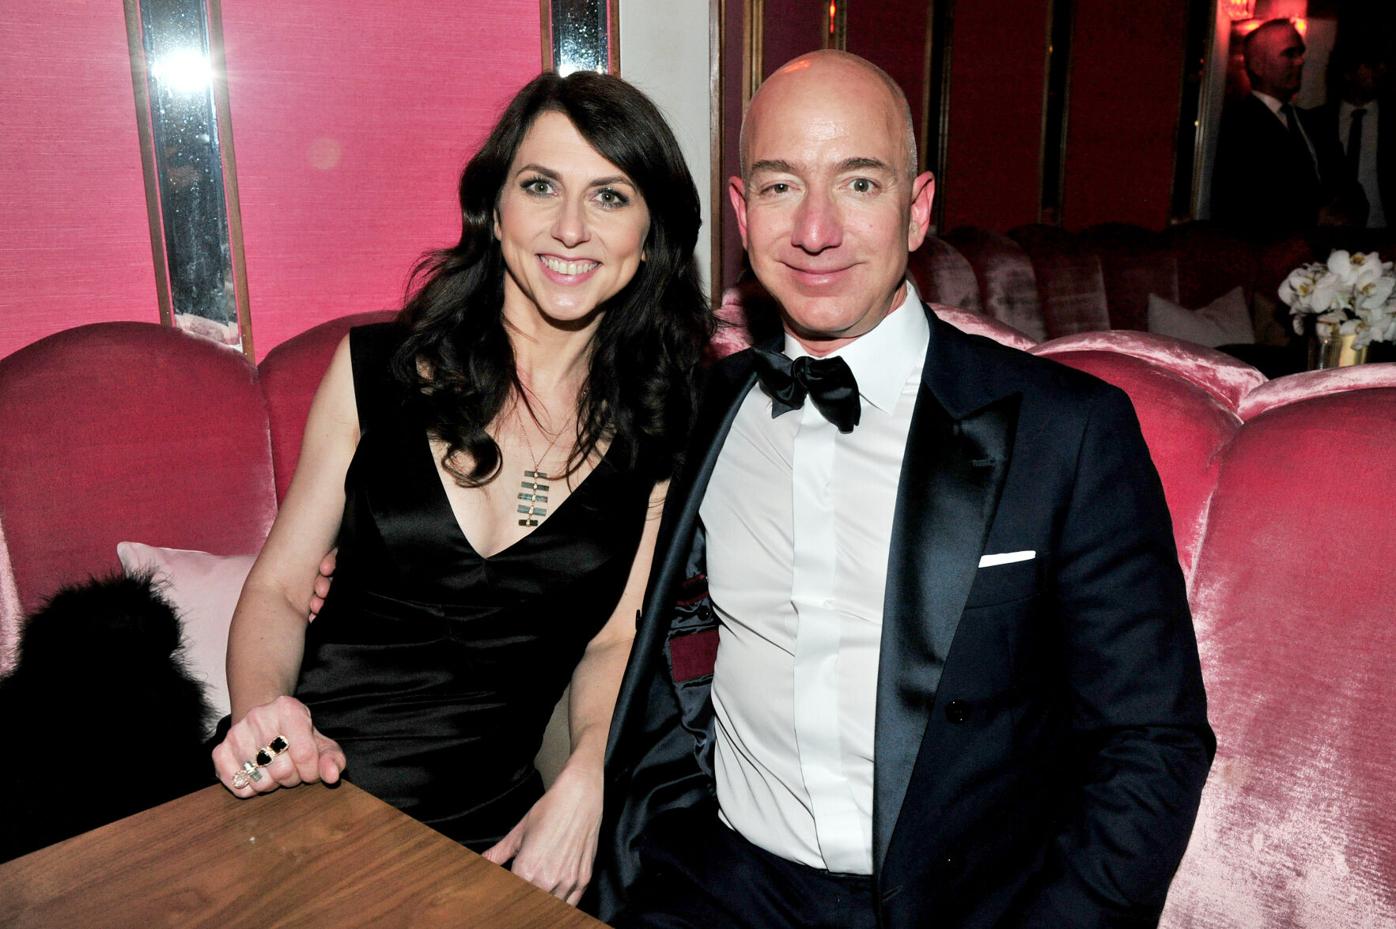 His ex-wife becomes the 22nd richest person in the world after